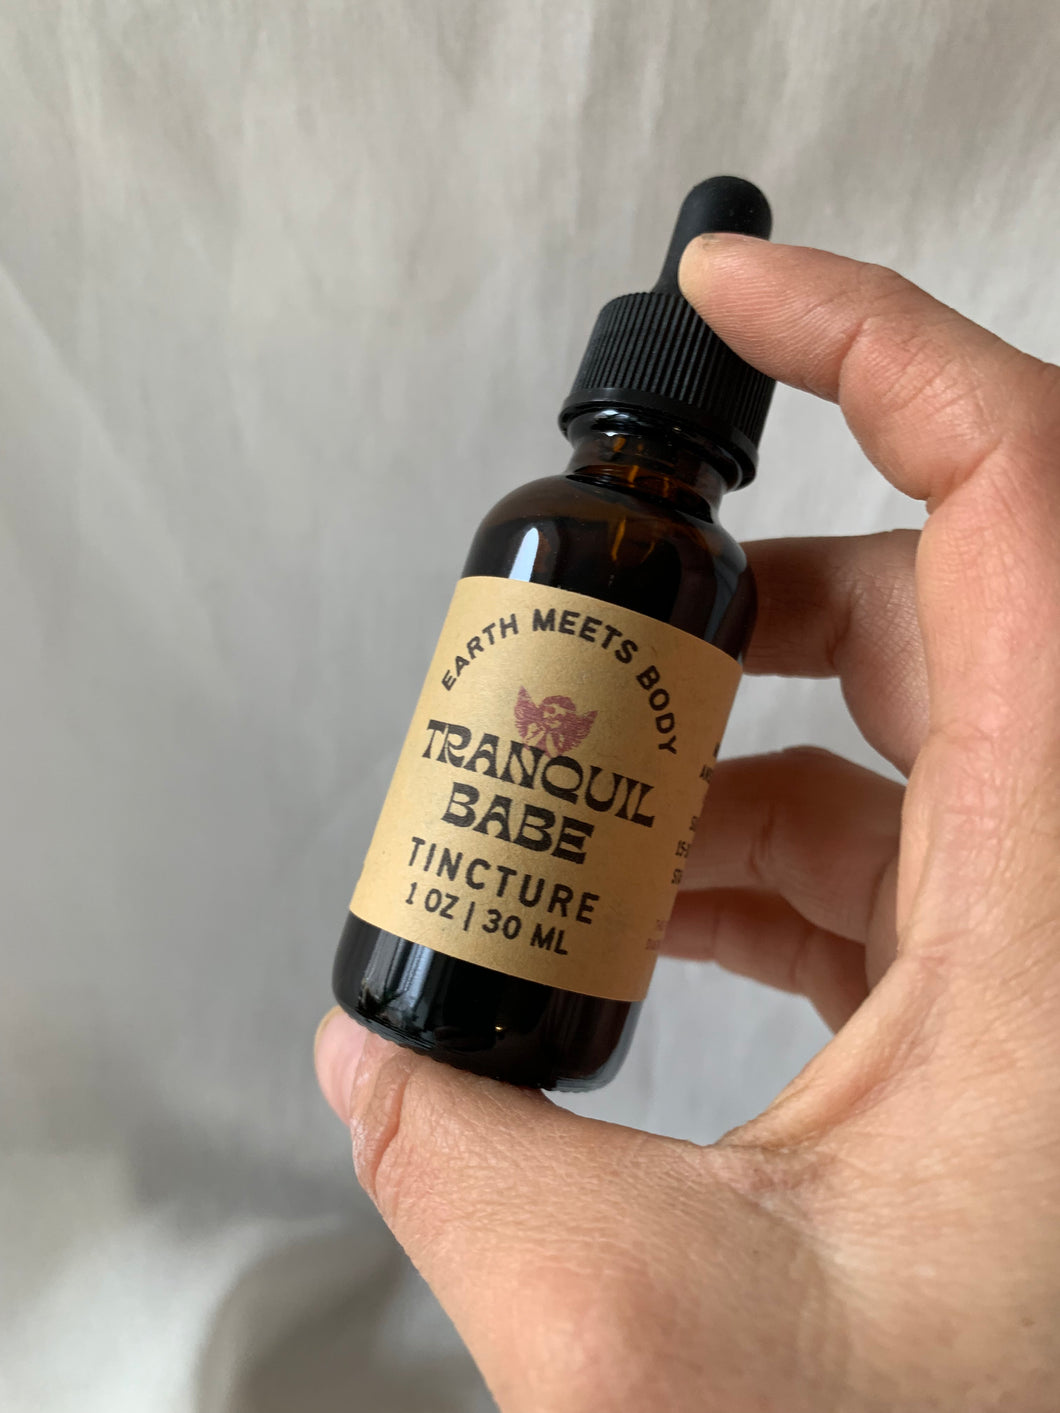 Tranquil Babe Tincture